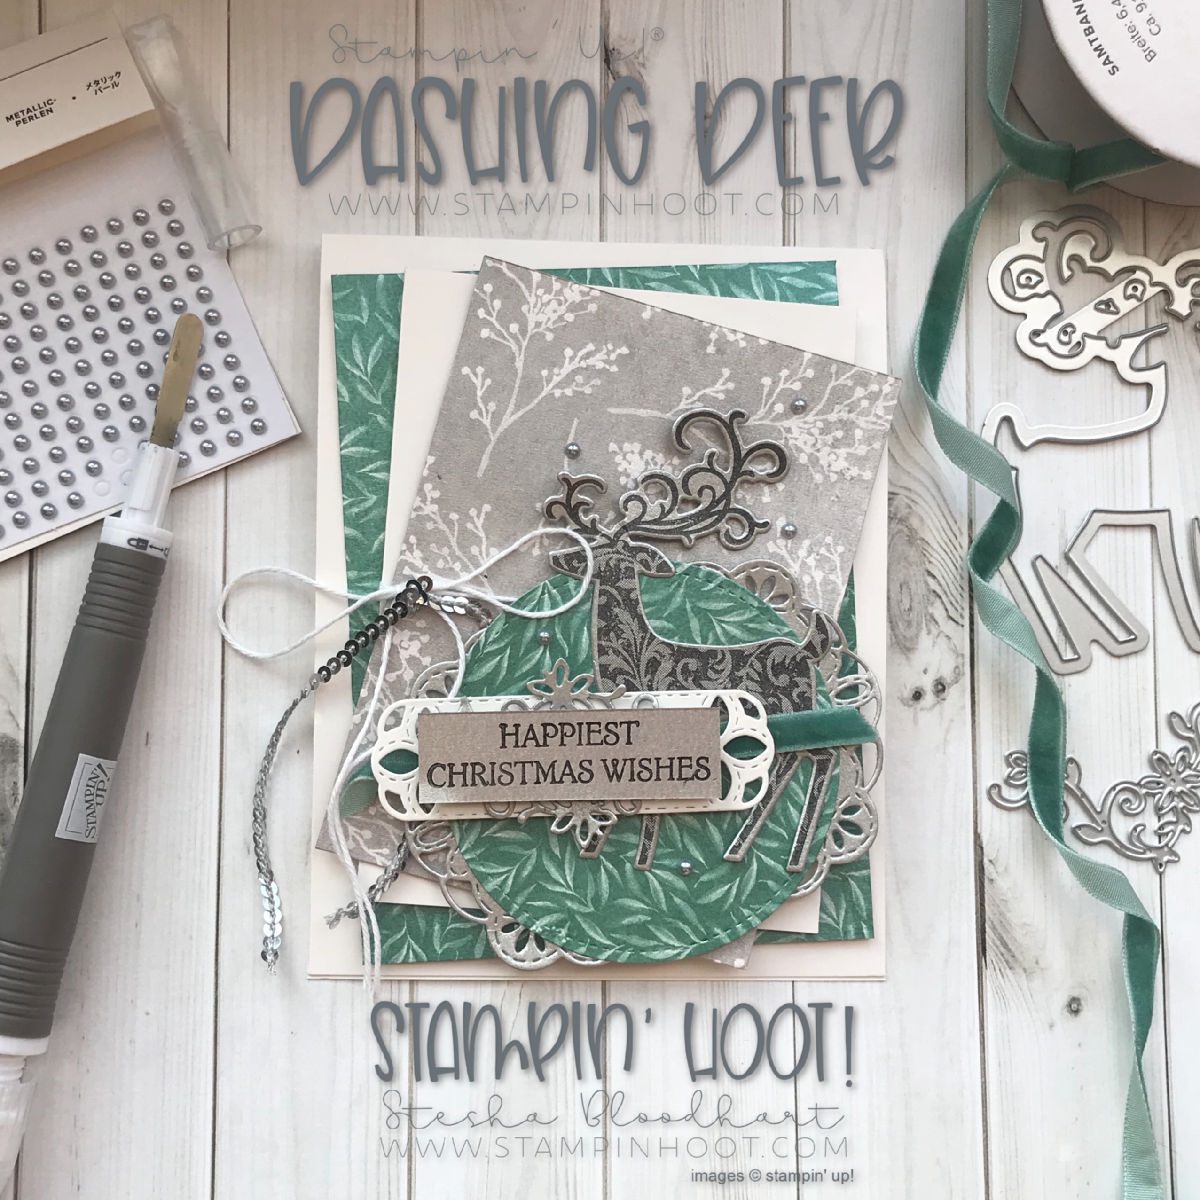 Dashing Deer Bundle by Stampin' Up! for the Stamp Review Crew Blog Hop. Christmas card created by Stesha Bloohart, Stampin' Hoot! #stampinhoot #steshabloohart